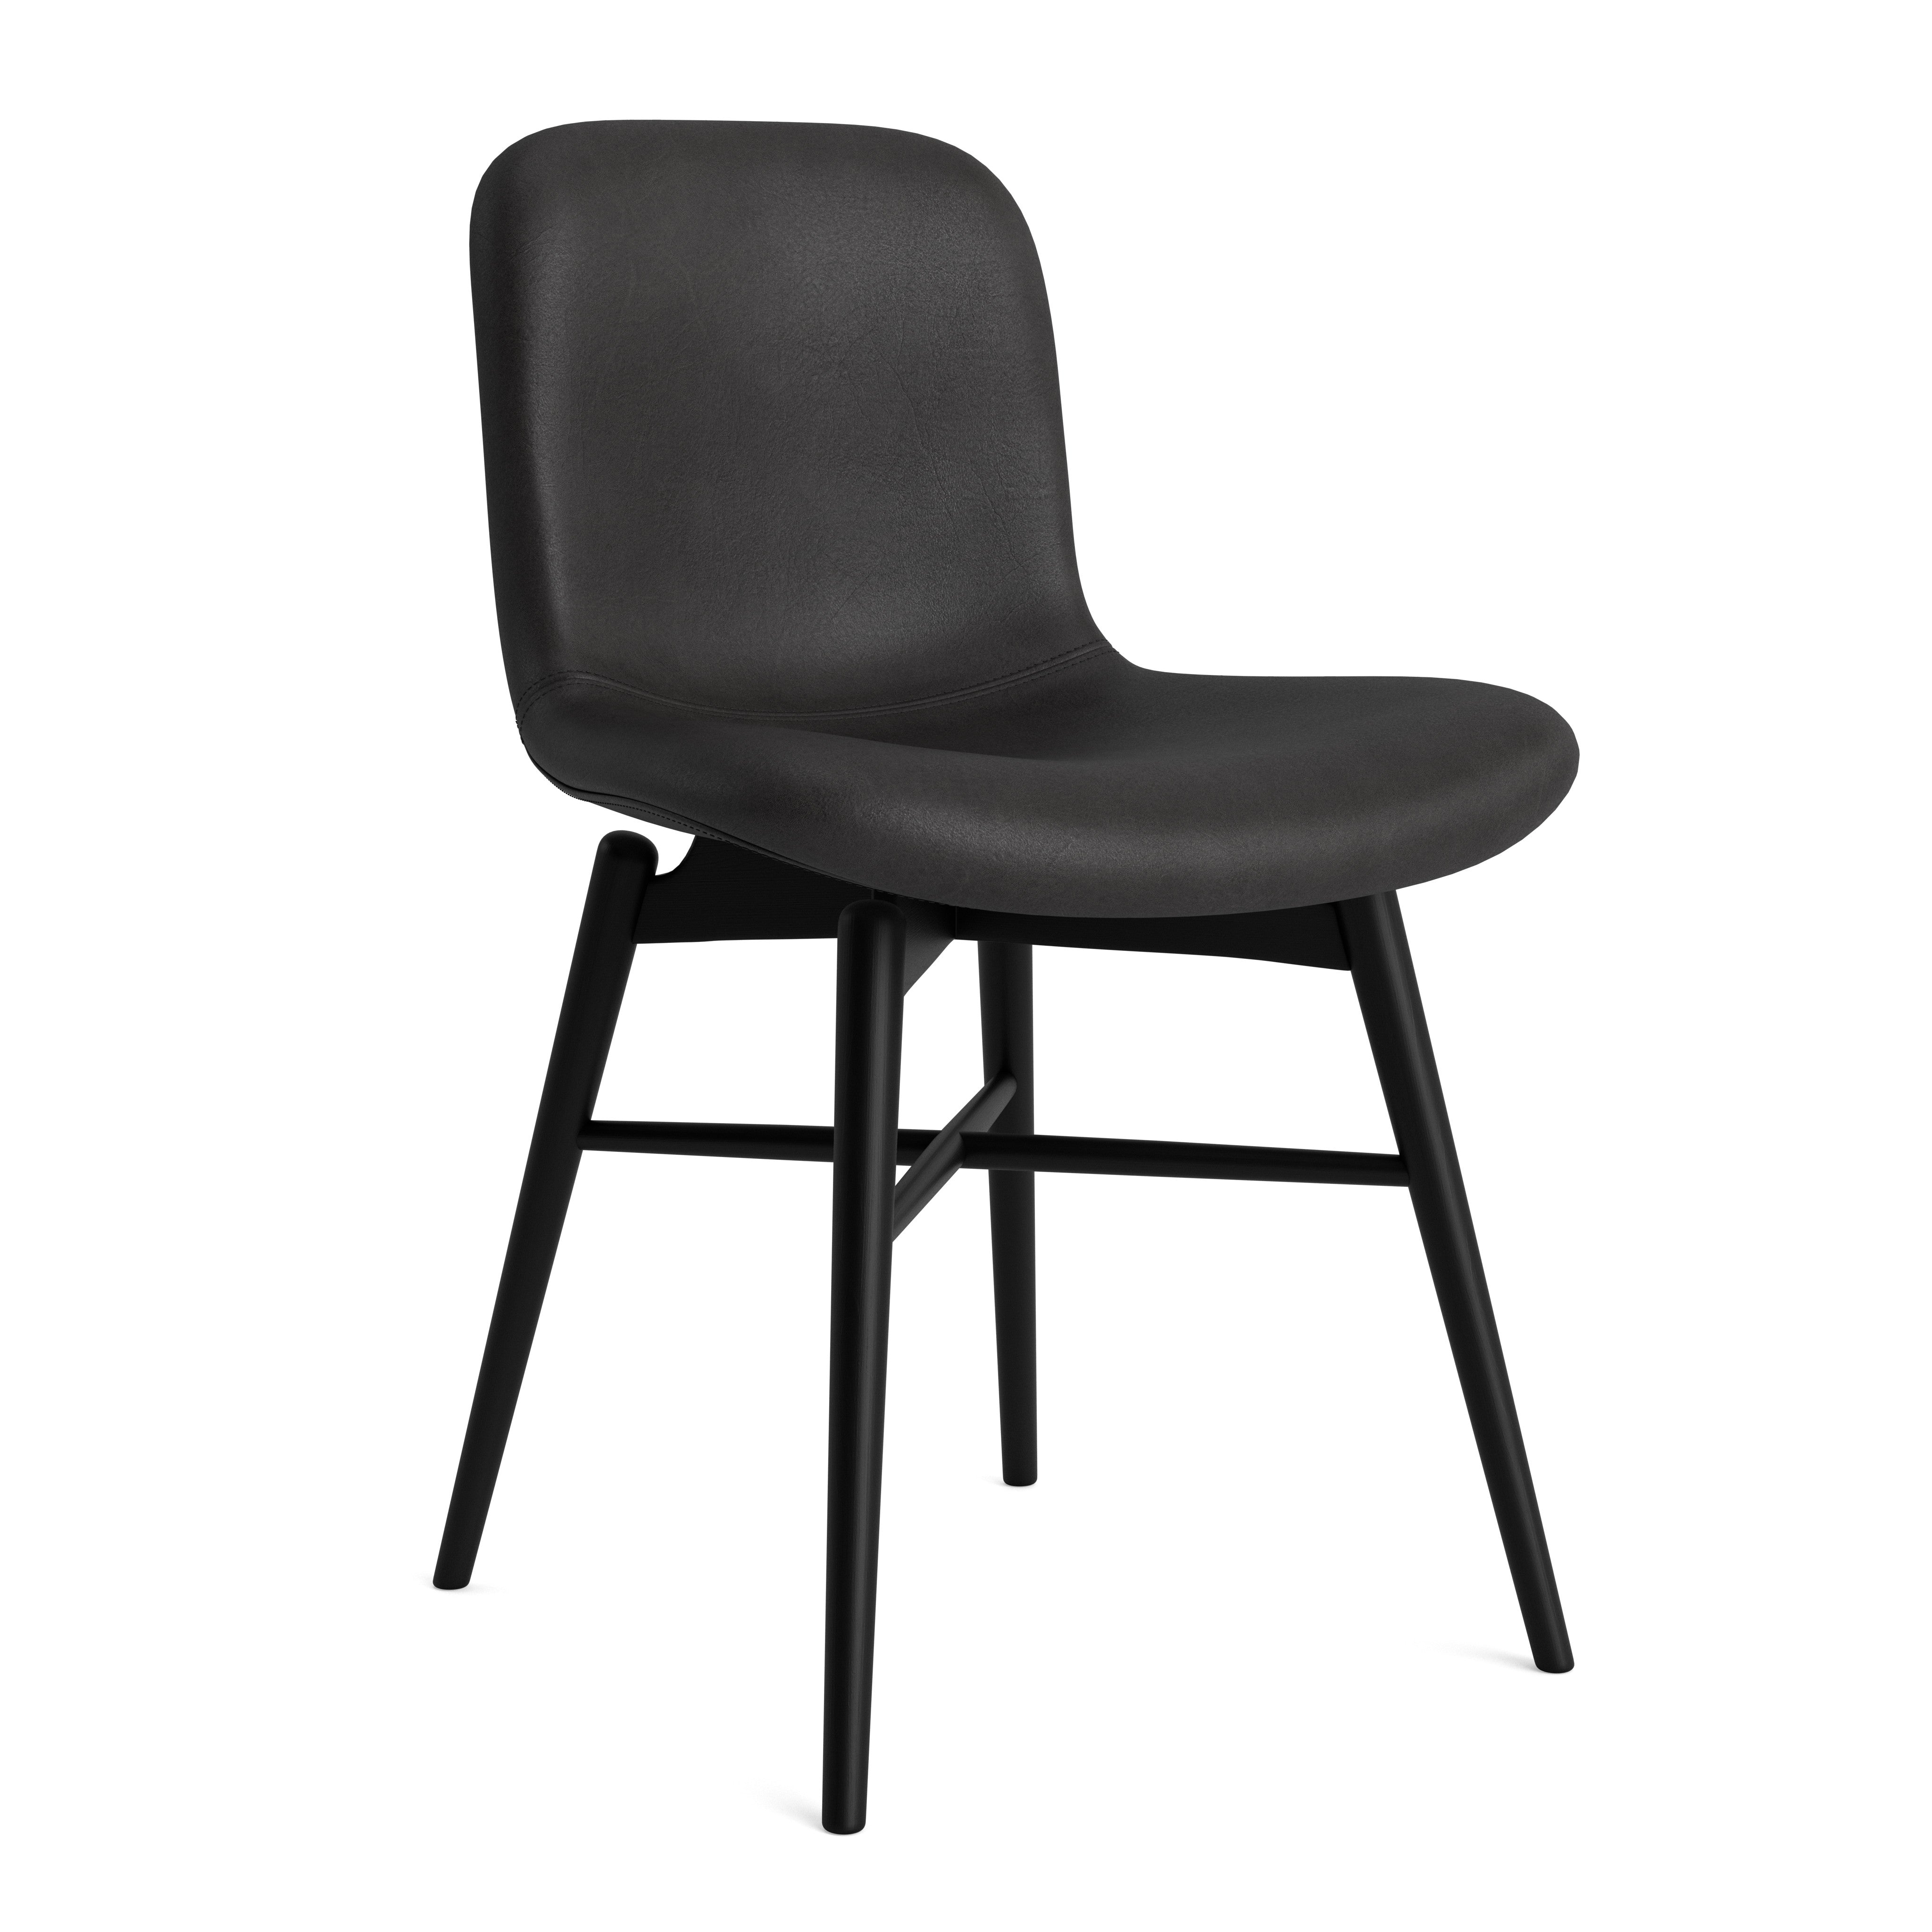 NORR11 Langue Chair Soft - Wood